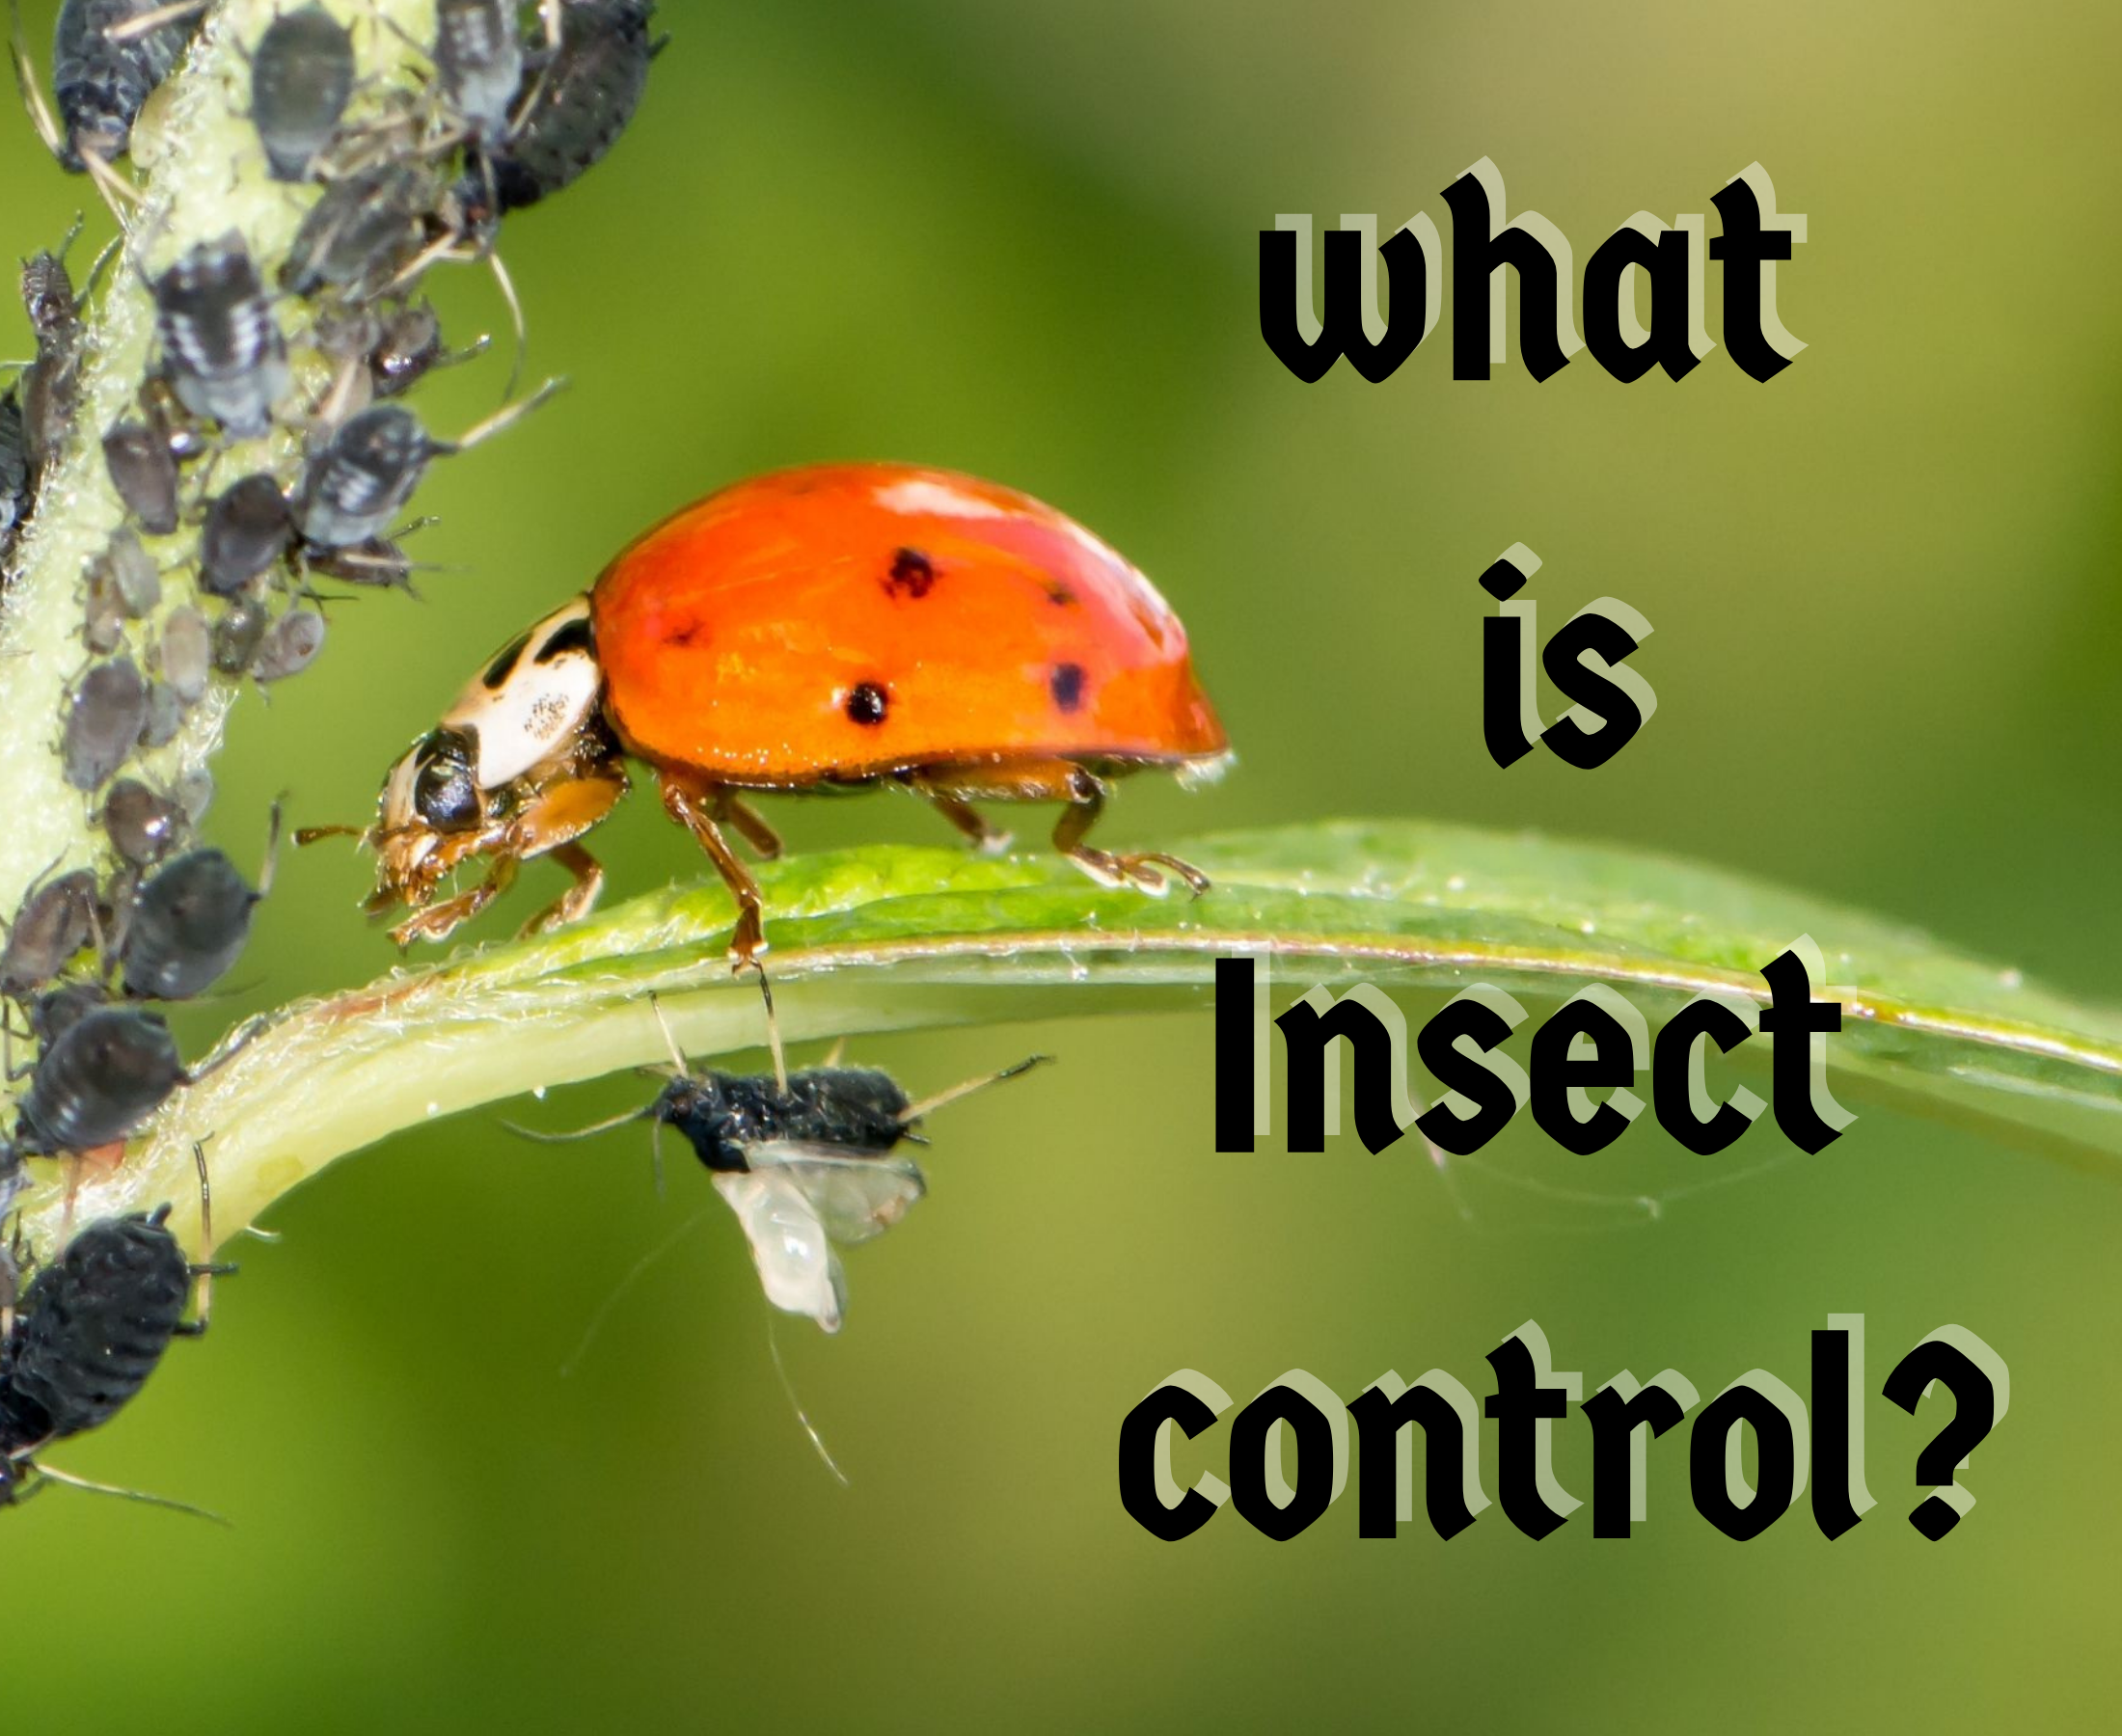 What do you mean by natural control of insects?